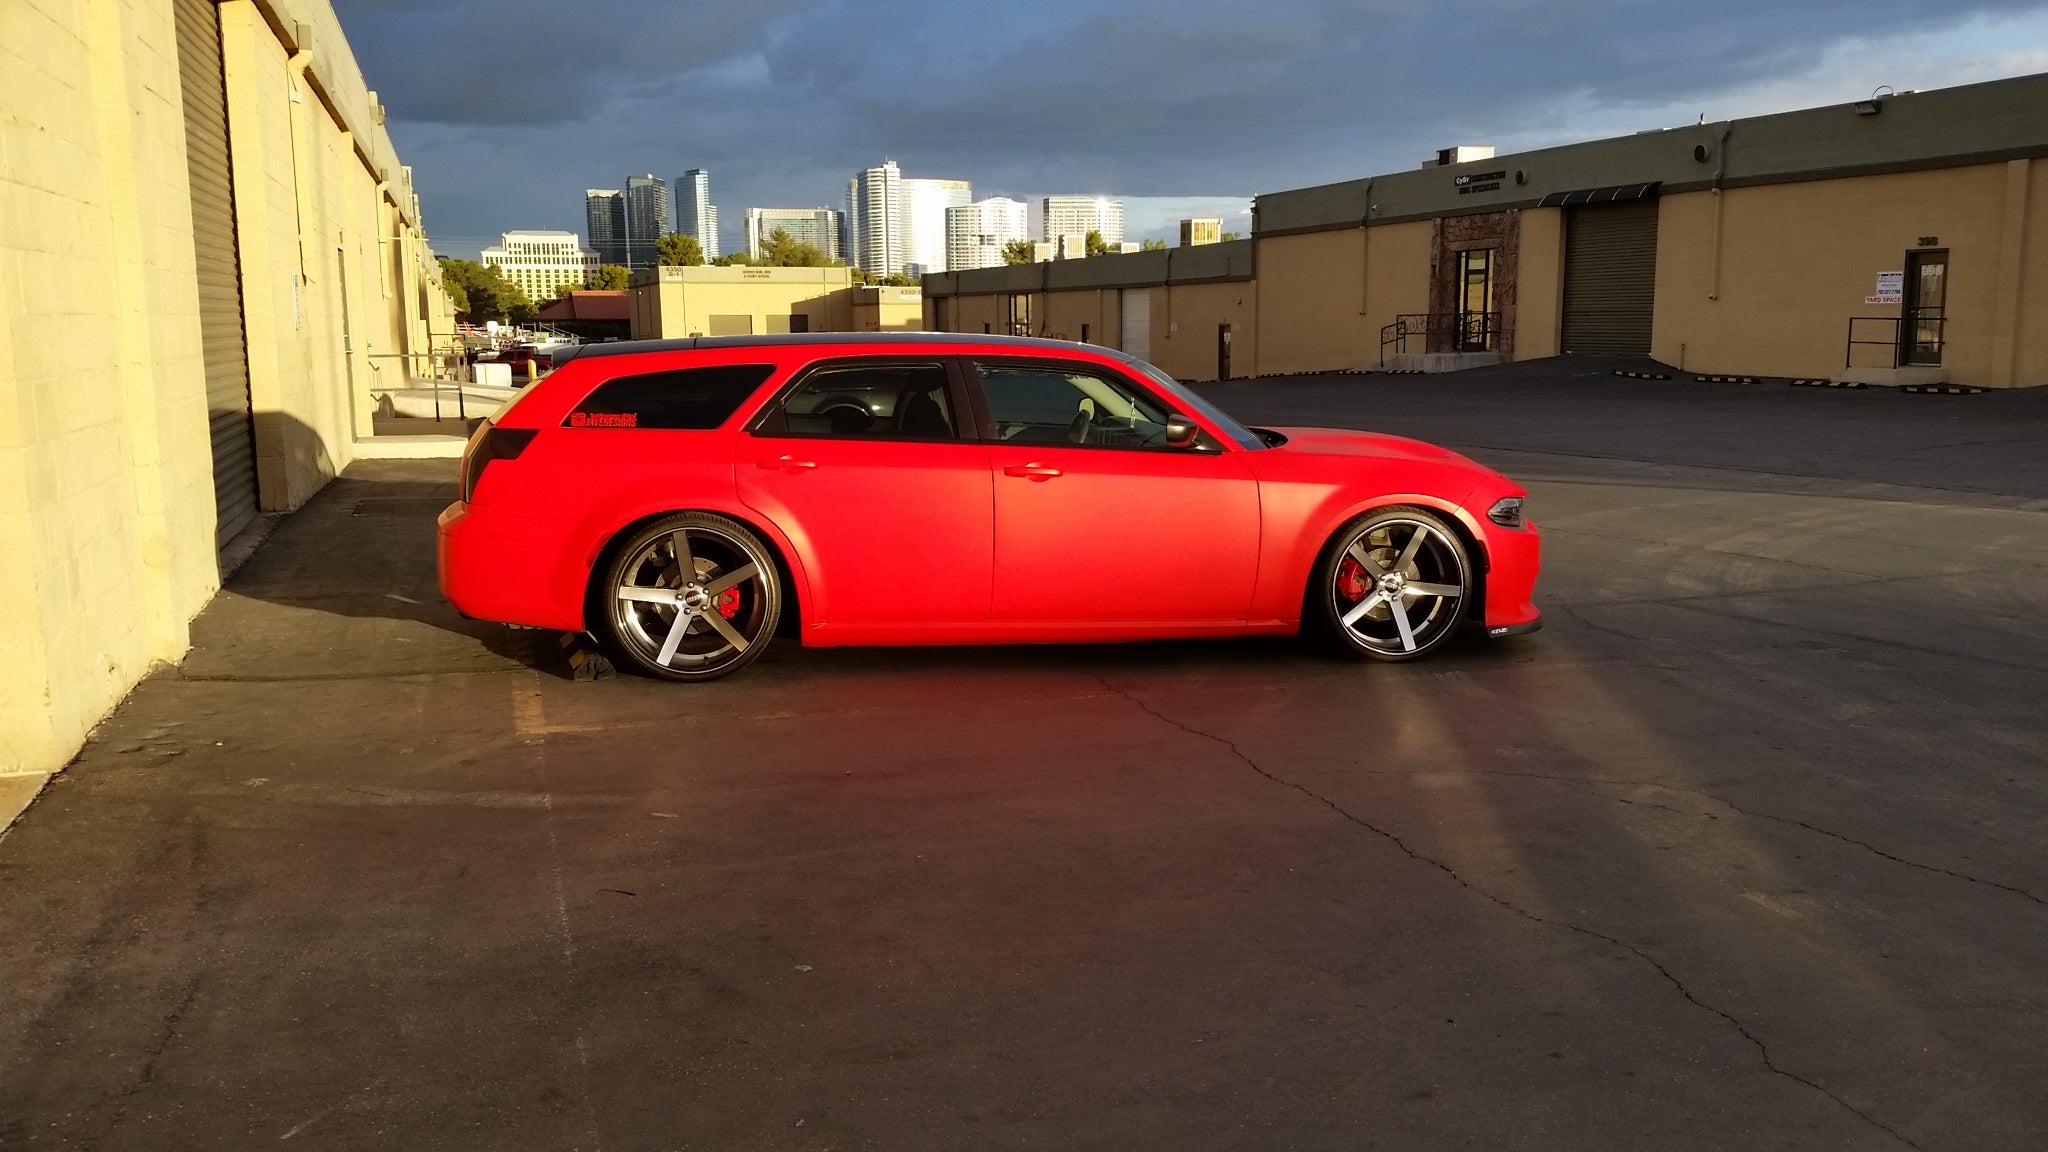 dodge magnum wide body kit This Kit Lets You Build the Dodge Magnum Hellcat Widebody